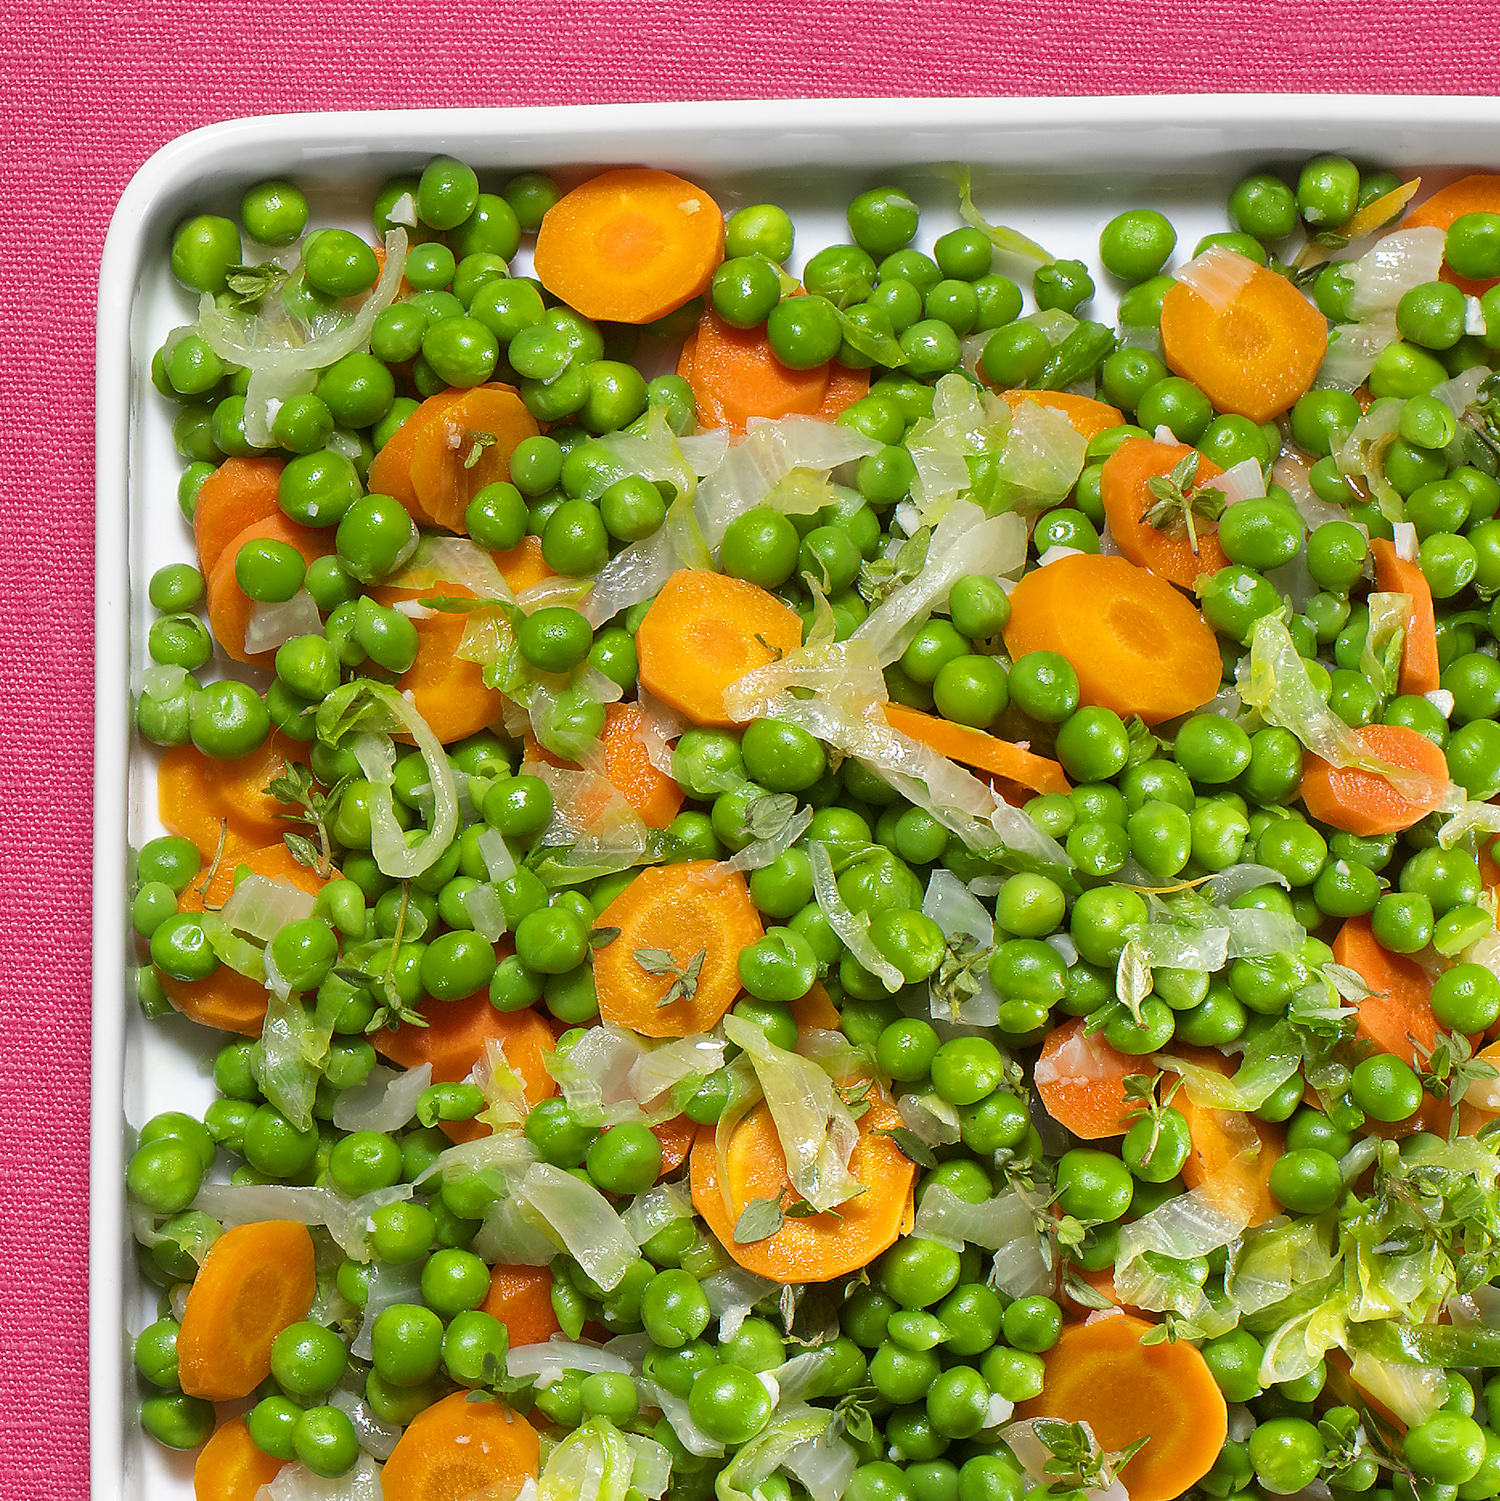 peas with lettuce and carrots